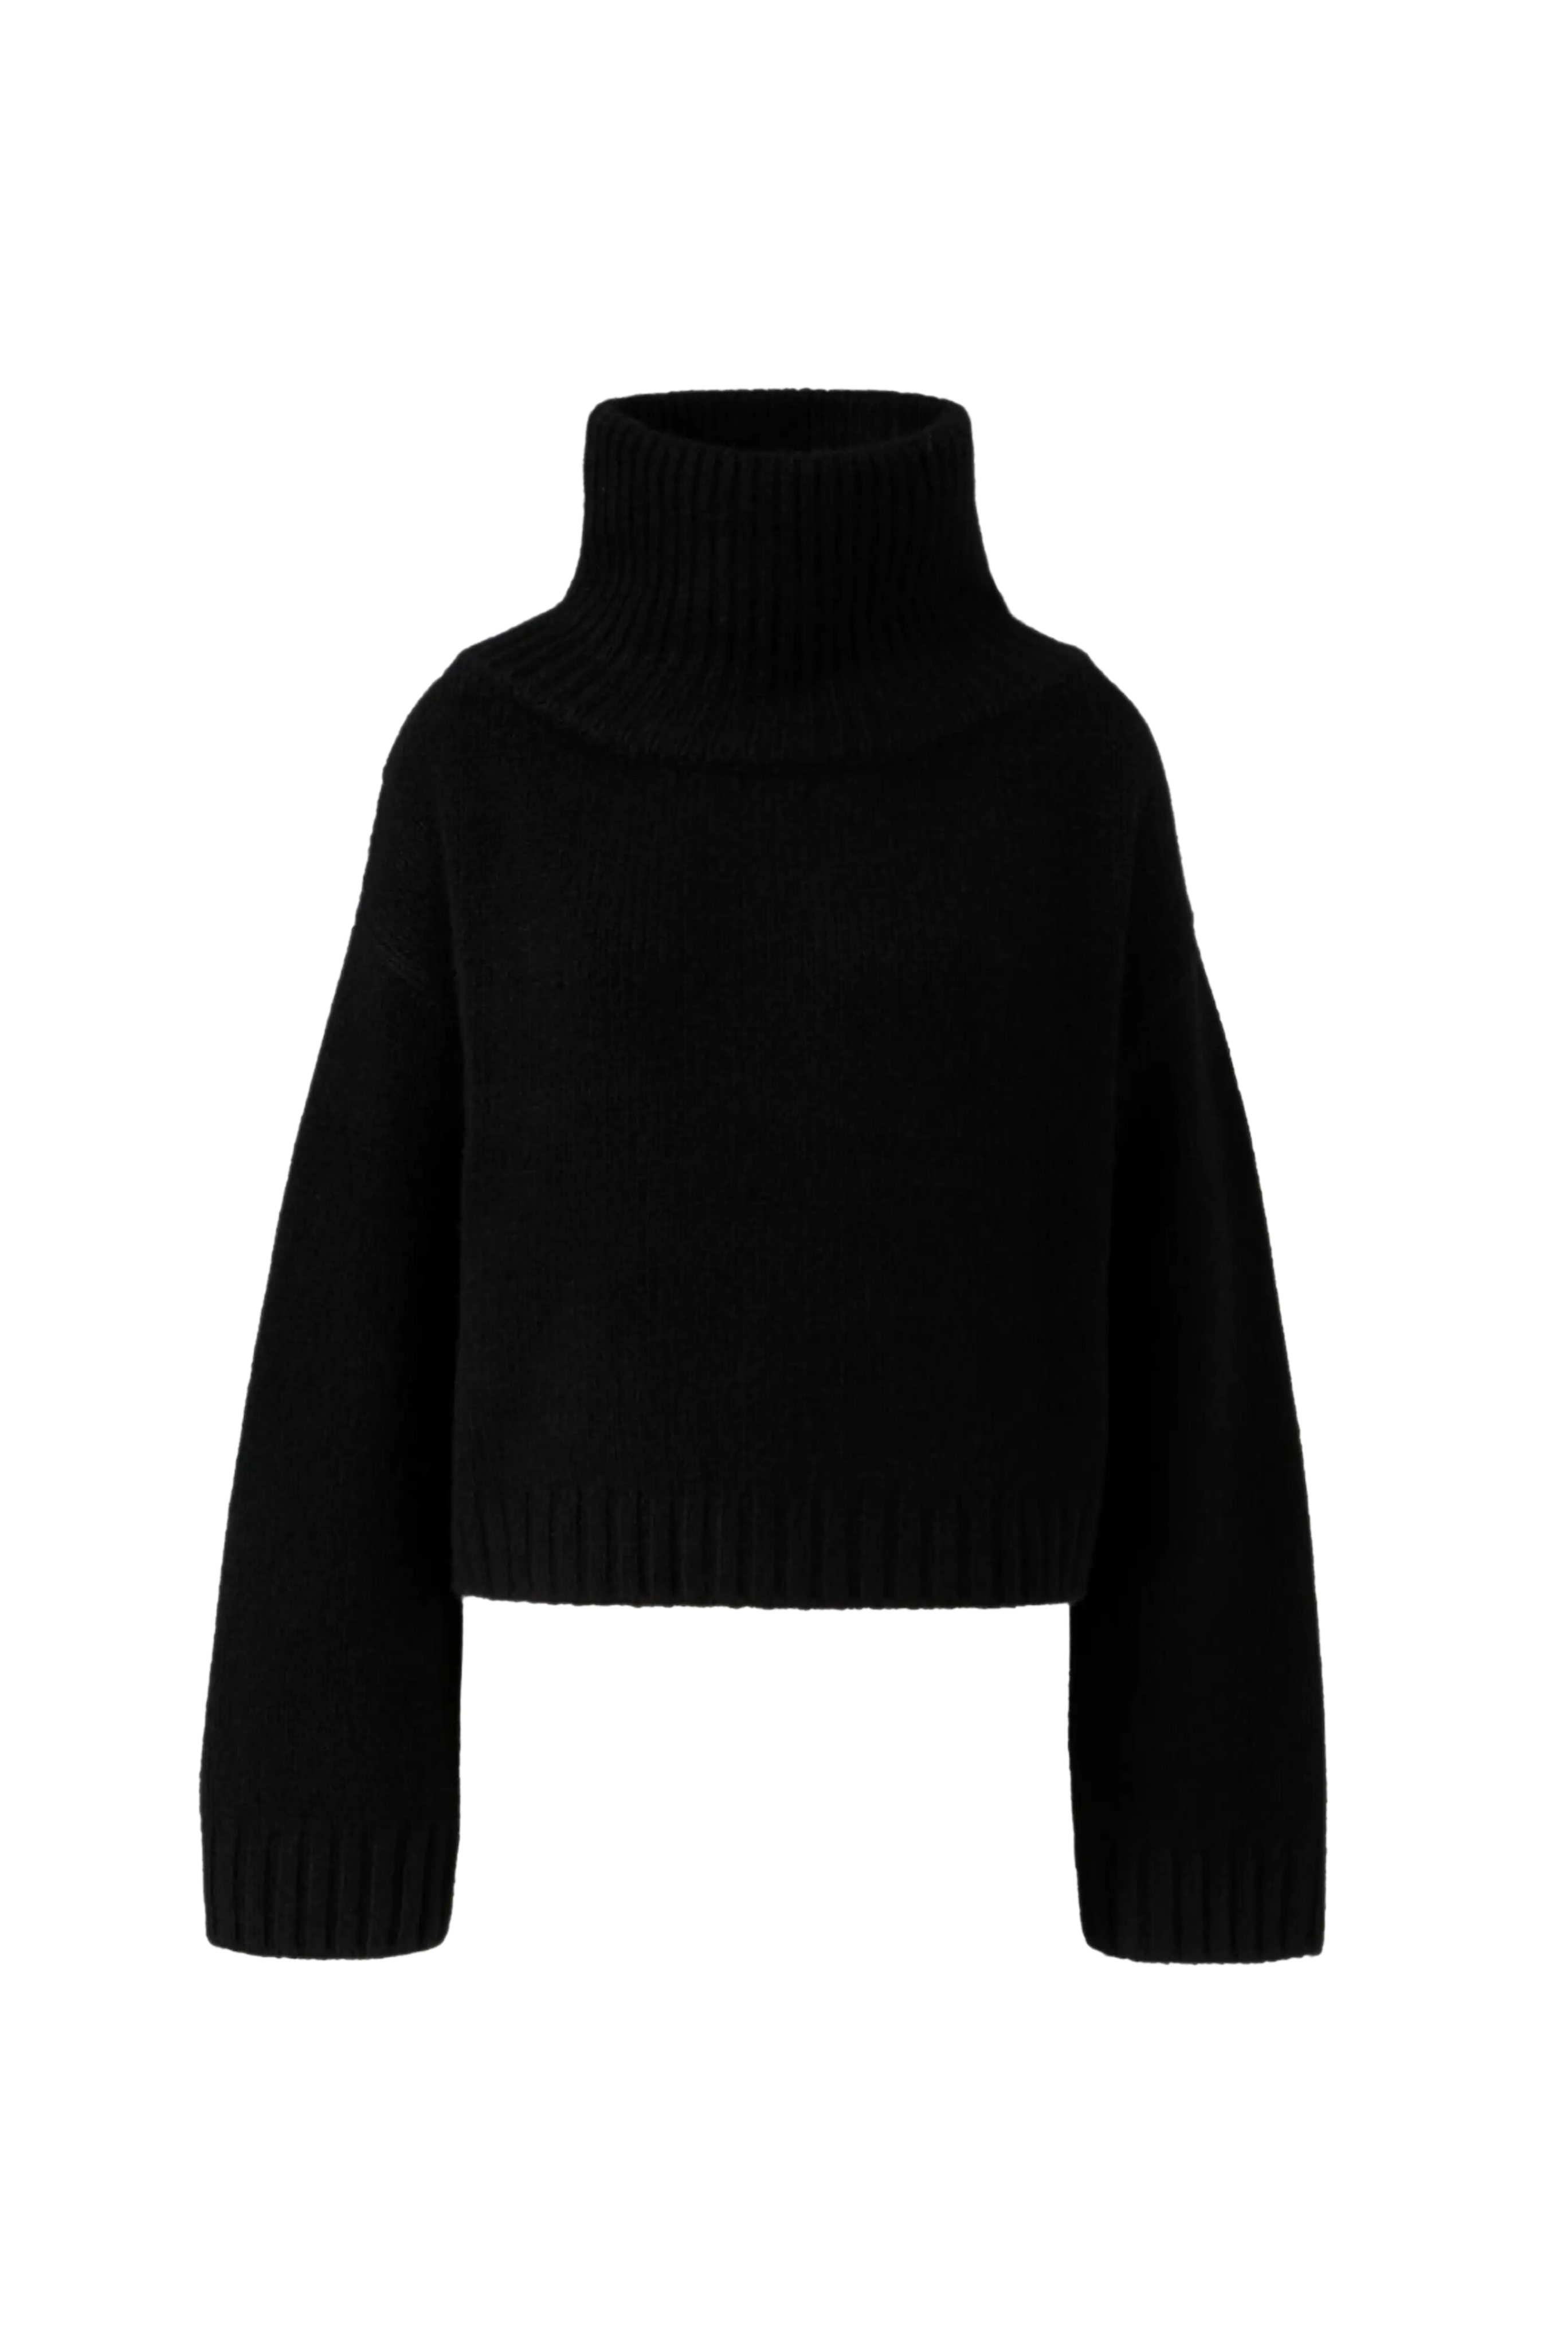 THE ROW Roque Cashmere Sweater